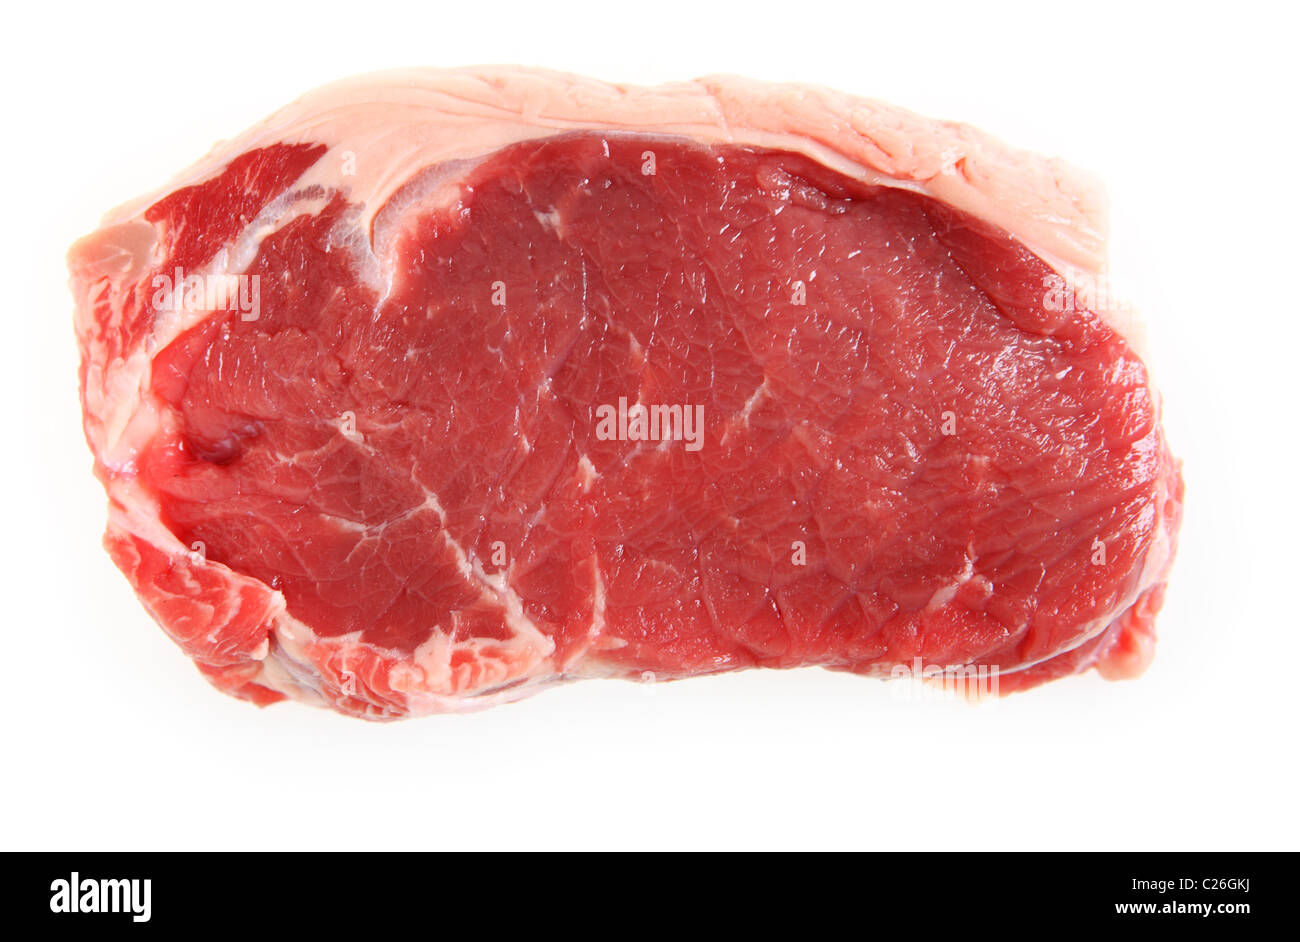 A veal sirloin steak isolated on a white background Stock Photo